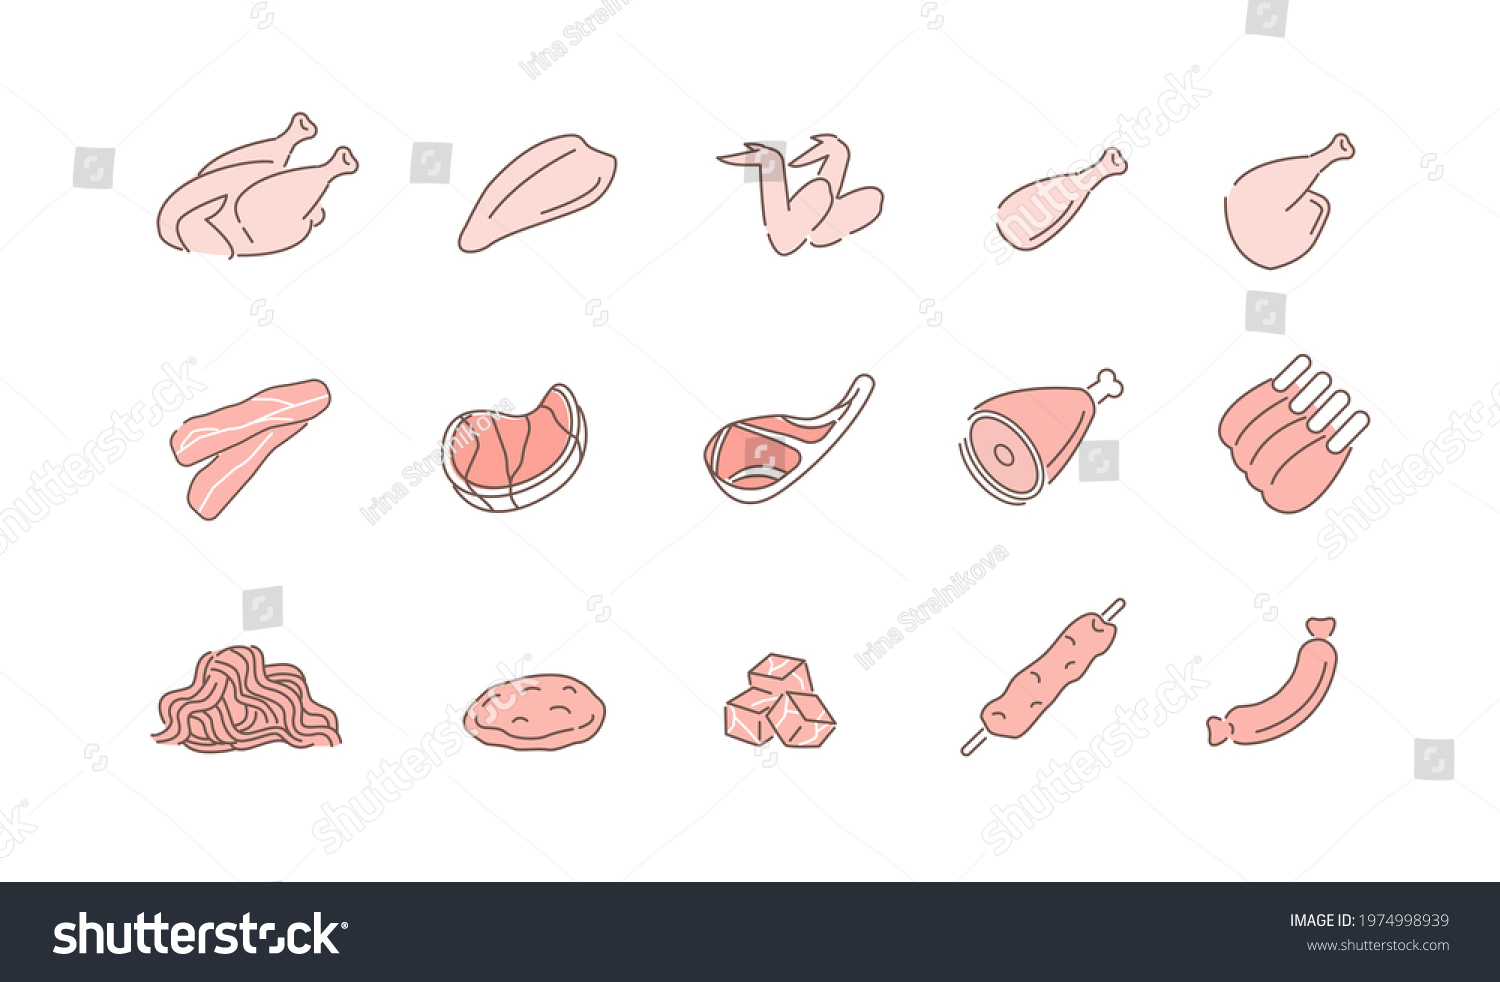 SVG of Different types of Meat. Chicken Breast, Drumsticks, Steak, Ribs and other Red Meat, Poultry and Pork Parts. Butcher Shop Symbols. Flat Line Vector Illustration and Icons set. svg